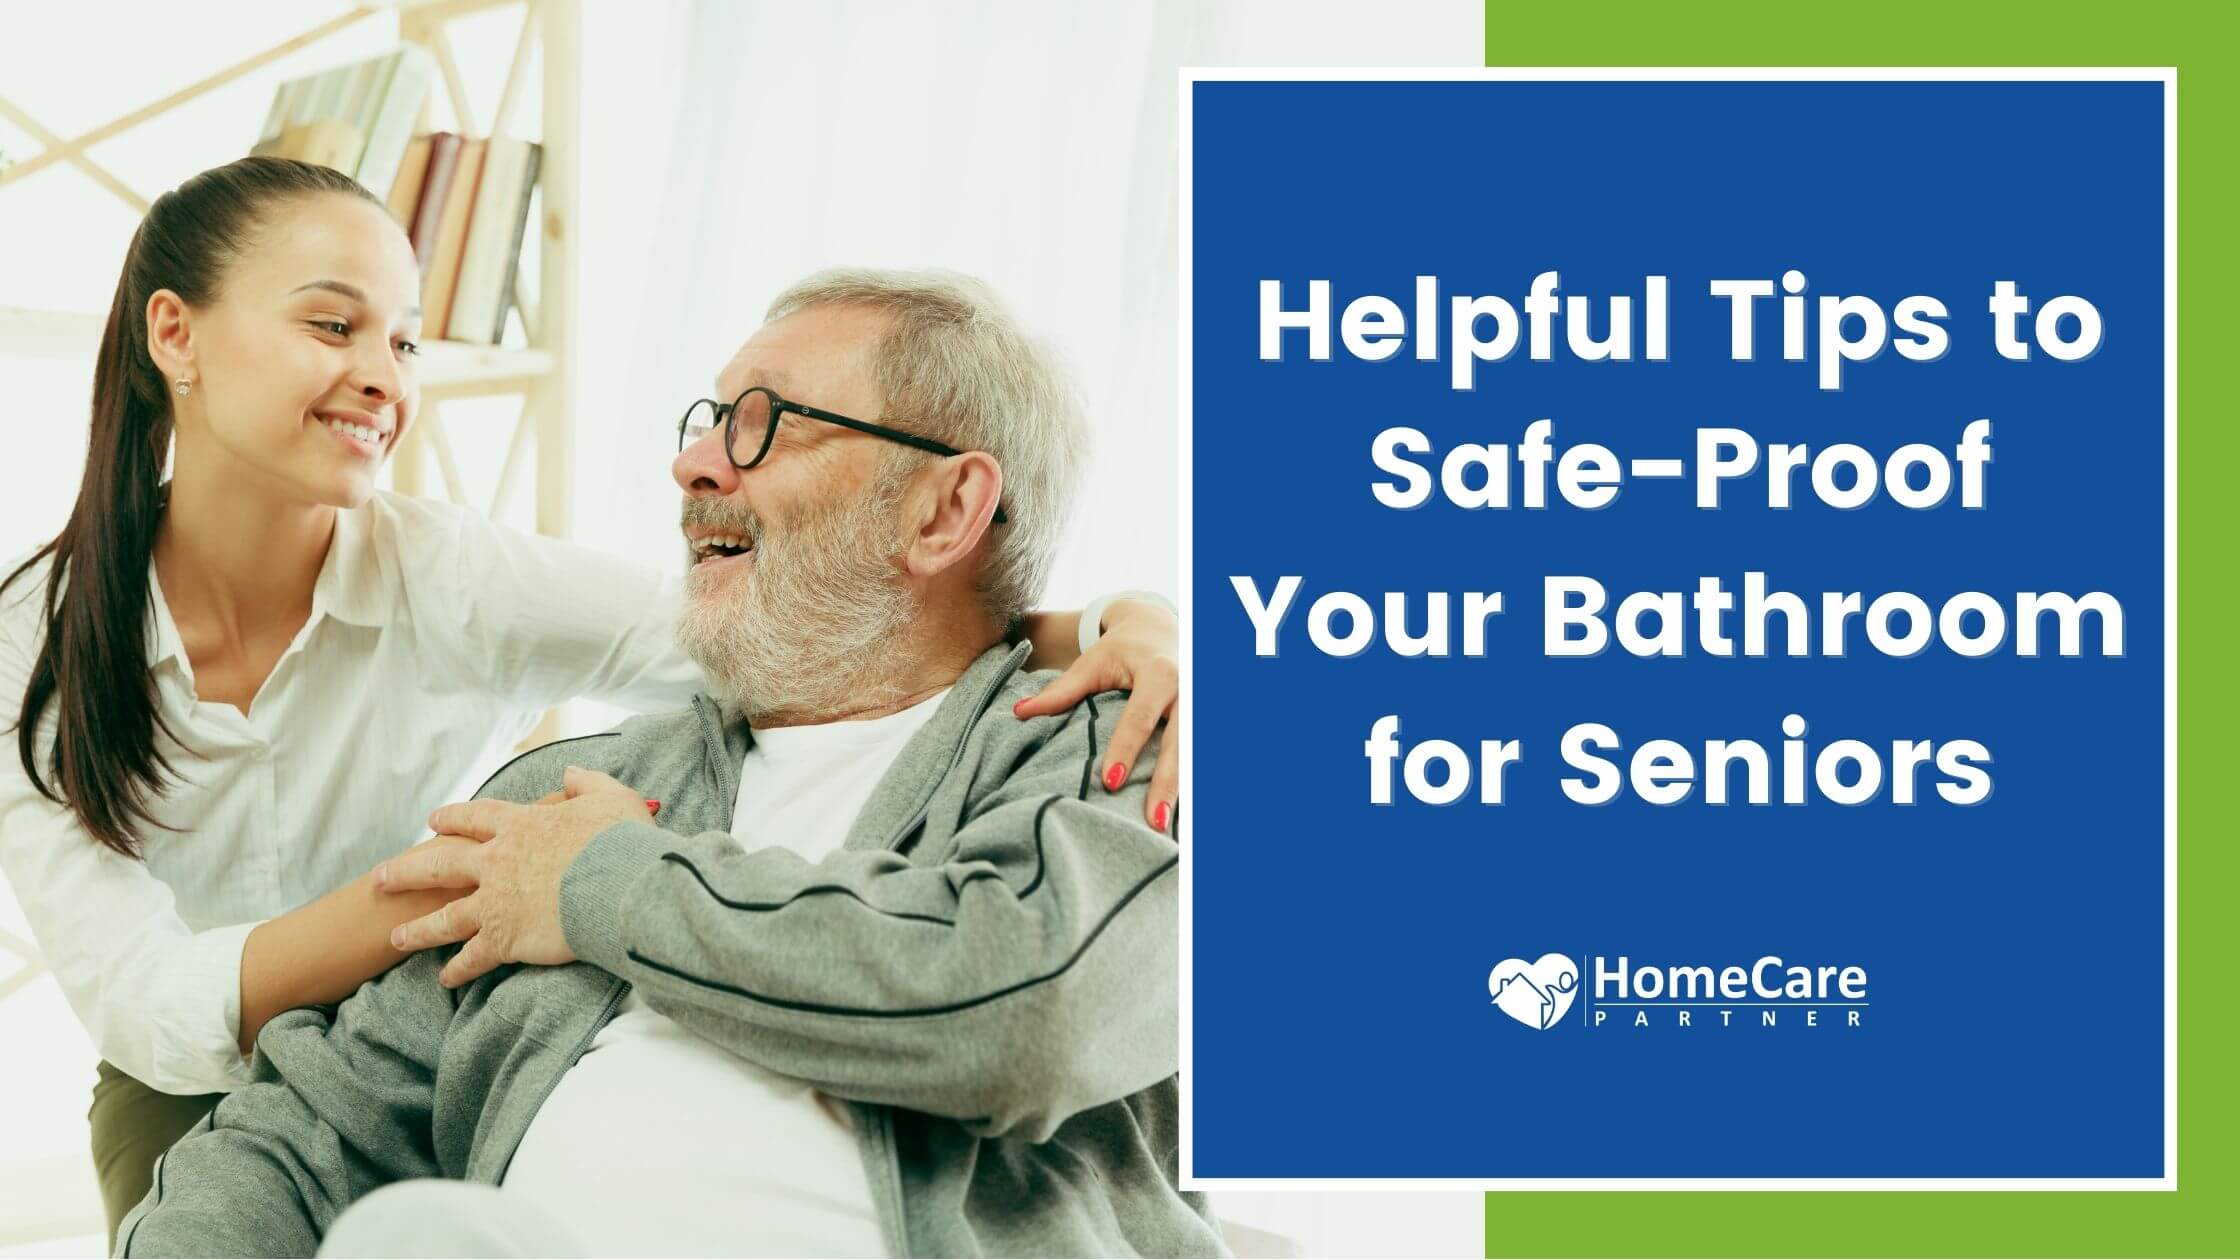 Helpful Tips to Safe-Proof Your Bathroom for Seniors